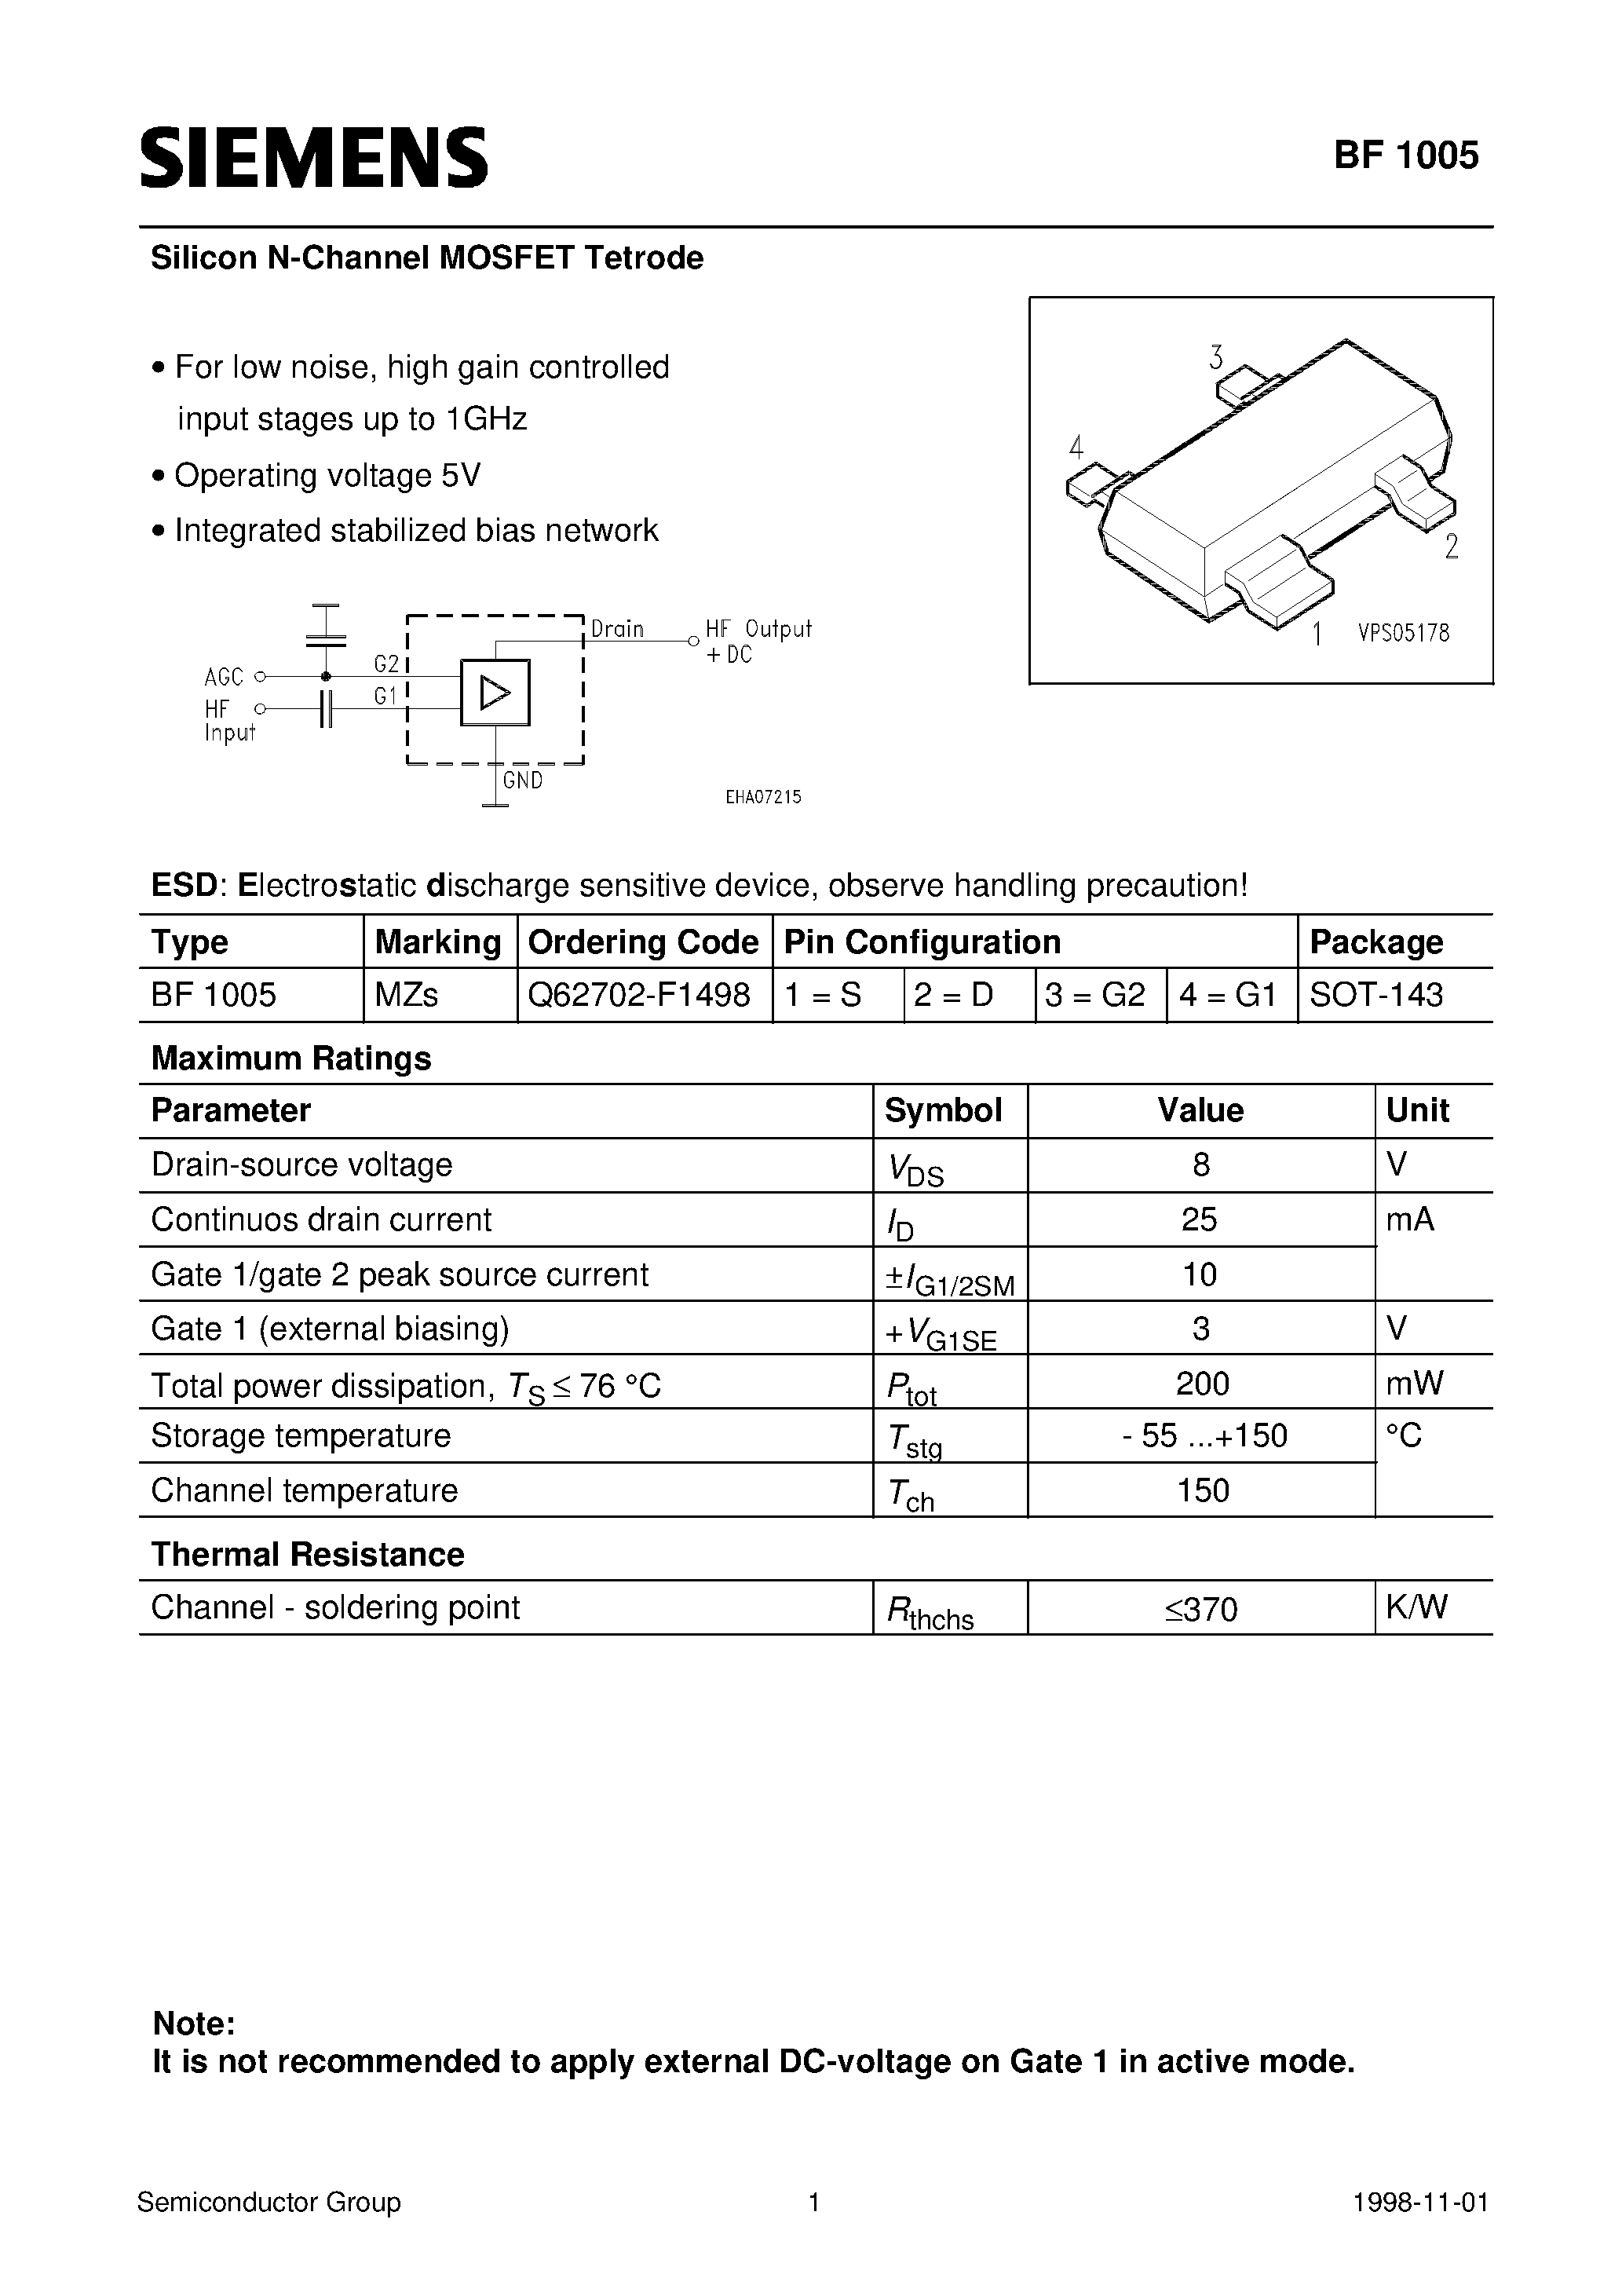 Даташит BF1005 - Silicon N-Channel MOSFET Tetrode (For low noise/ high gain controlled input stages up to 1GHz Operating voltage 5V Integrated stabilized bias network) страница 1